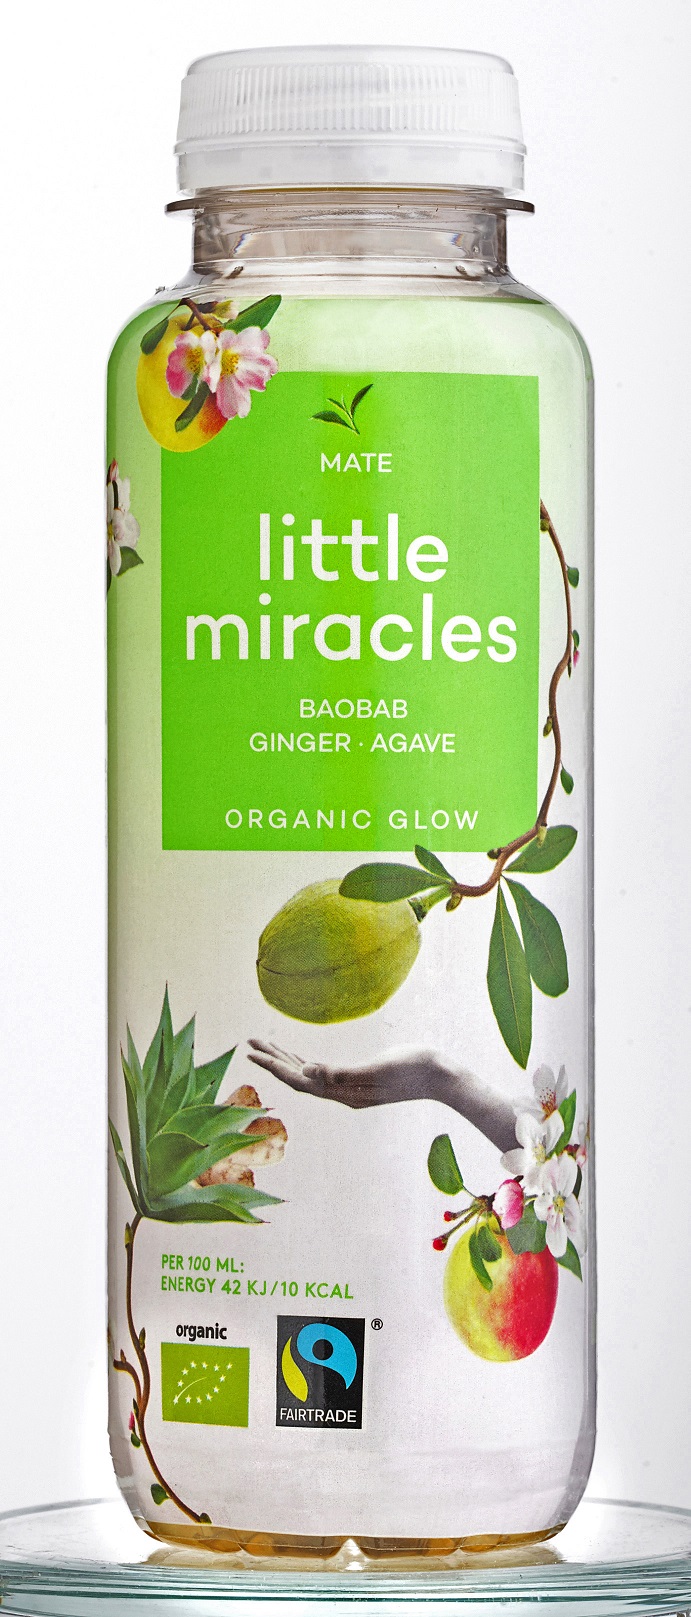 Little Miracles Mate Baobab